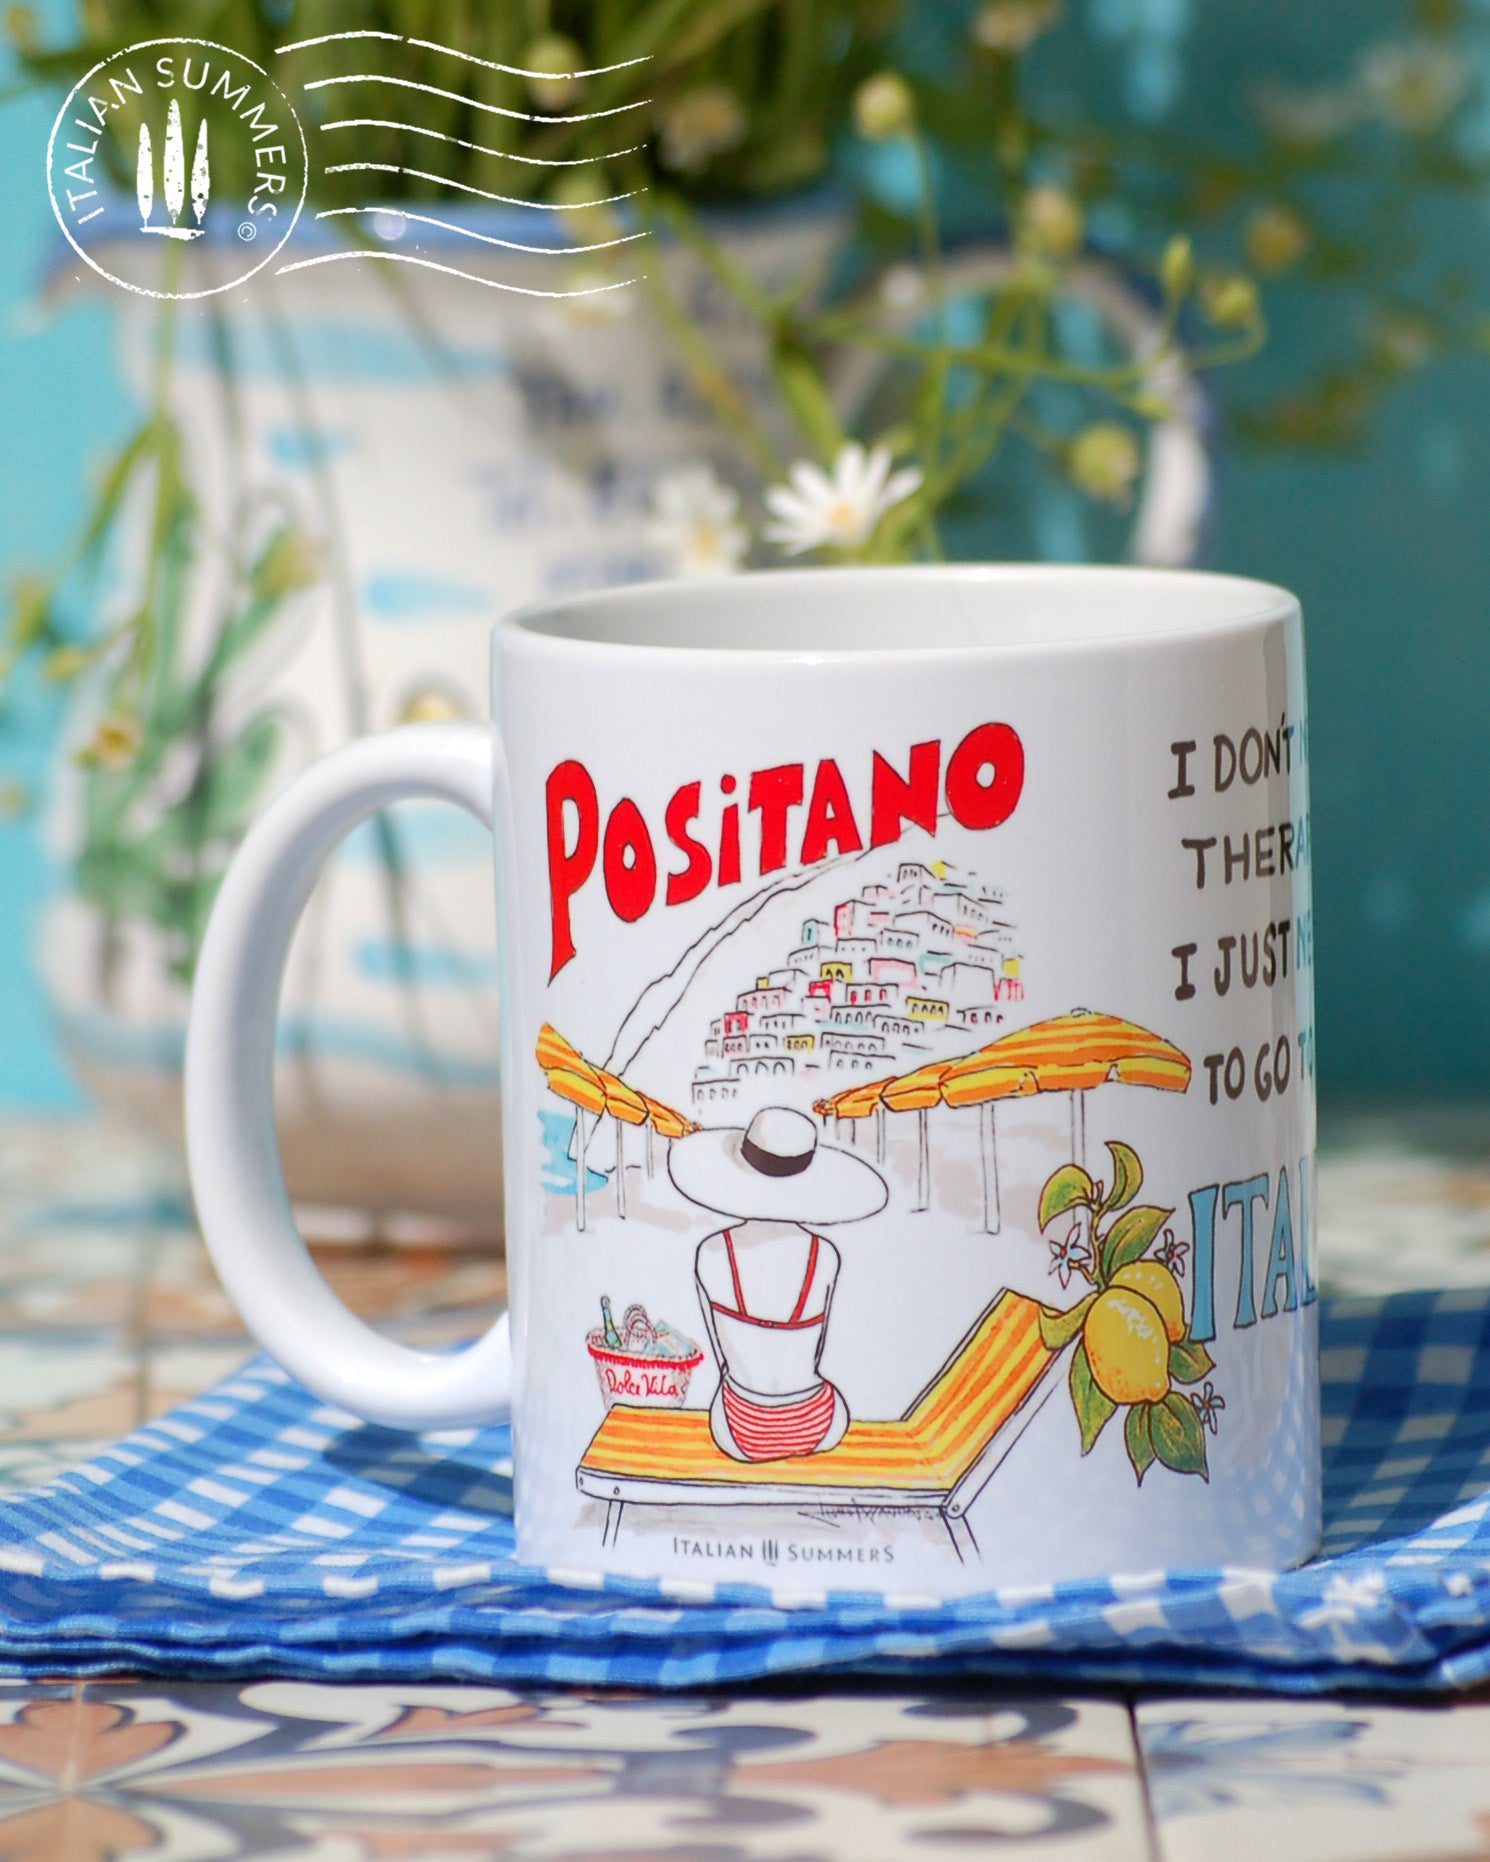 Mug inspired by Positano with a sketch of Positano beach with the yellow orange beach umbrellas and a view and on Positano. There is a lady sittng on a striped beach bed, she wears a hat and has a straw bag with Dolce Vita written on it. This sketch is on tweo sides of the mug and in the center there is the quote I don't need therapy, I just need to go to Italy. There is also Positano written on the mug is red above the village of Positano. The quote is decorated with lemons.